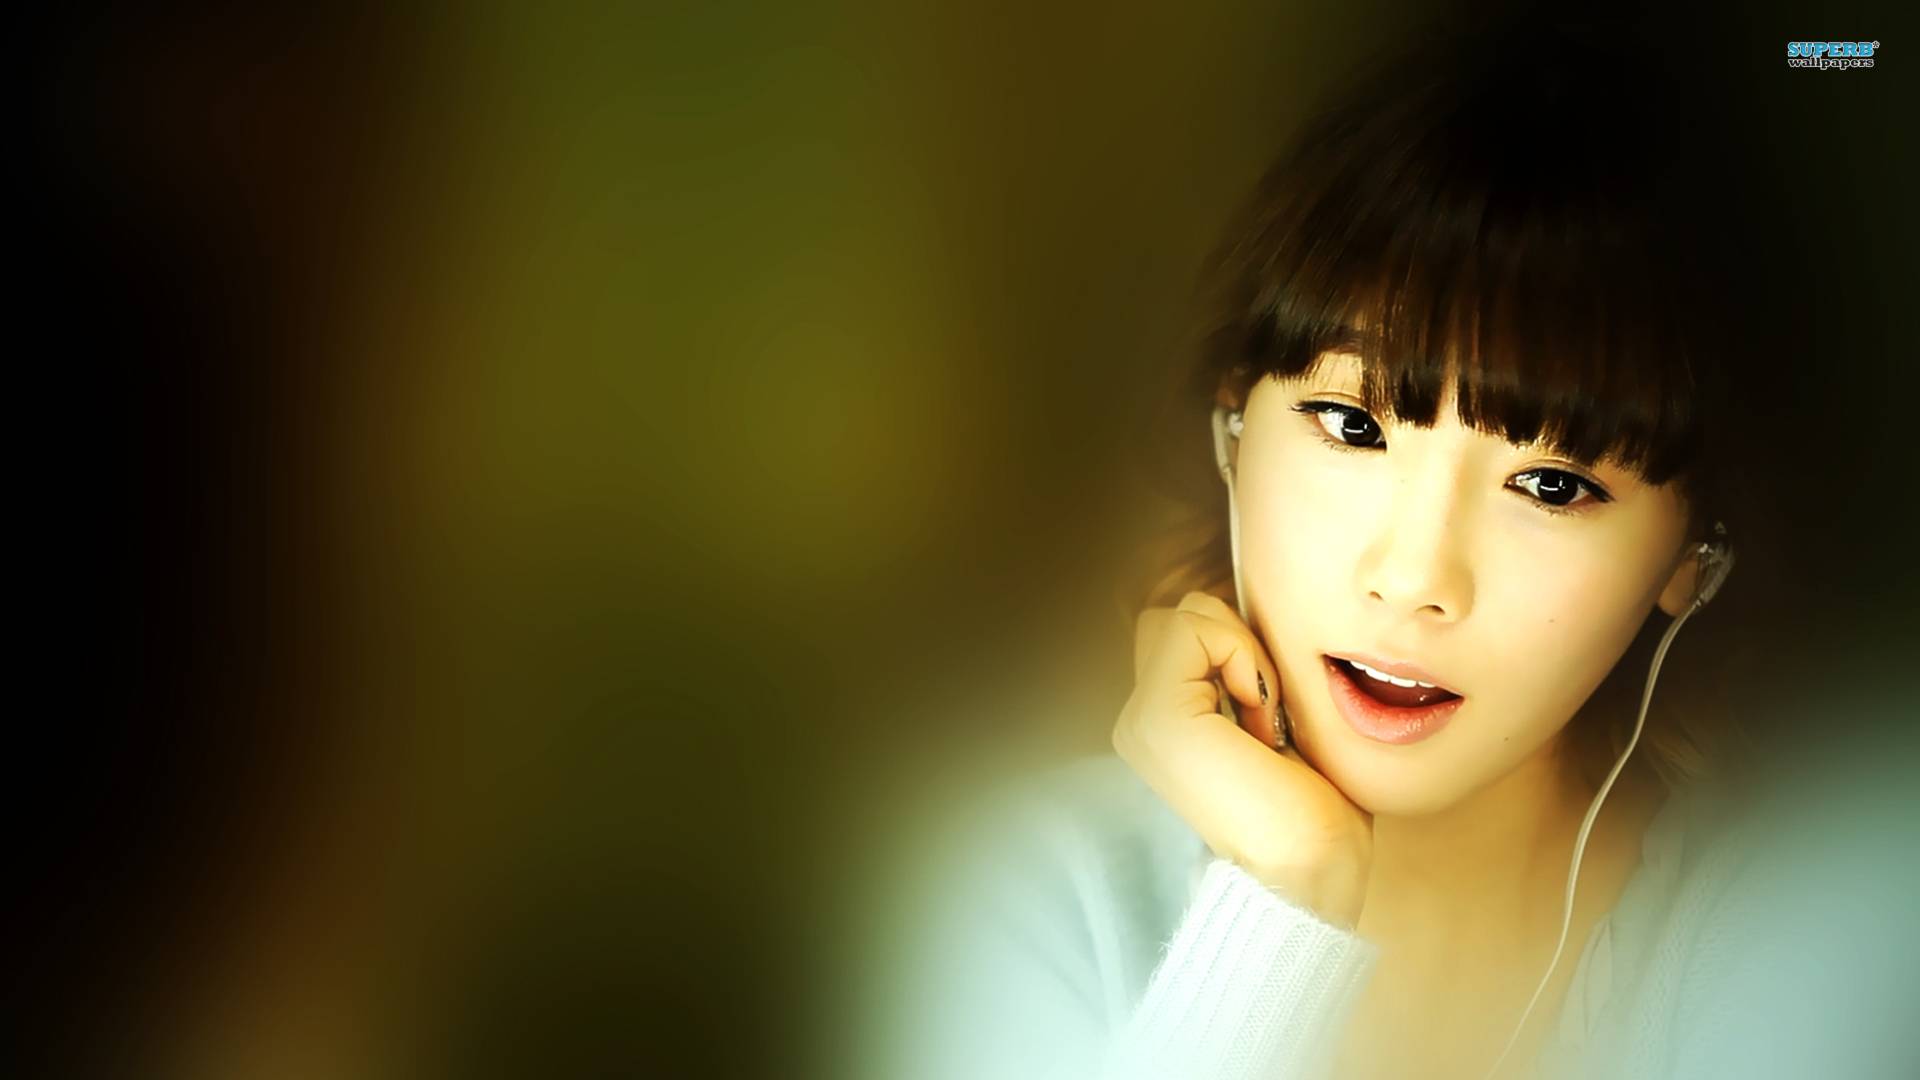 Taeyeon Wallpaper HD Android Application